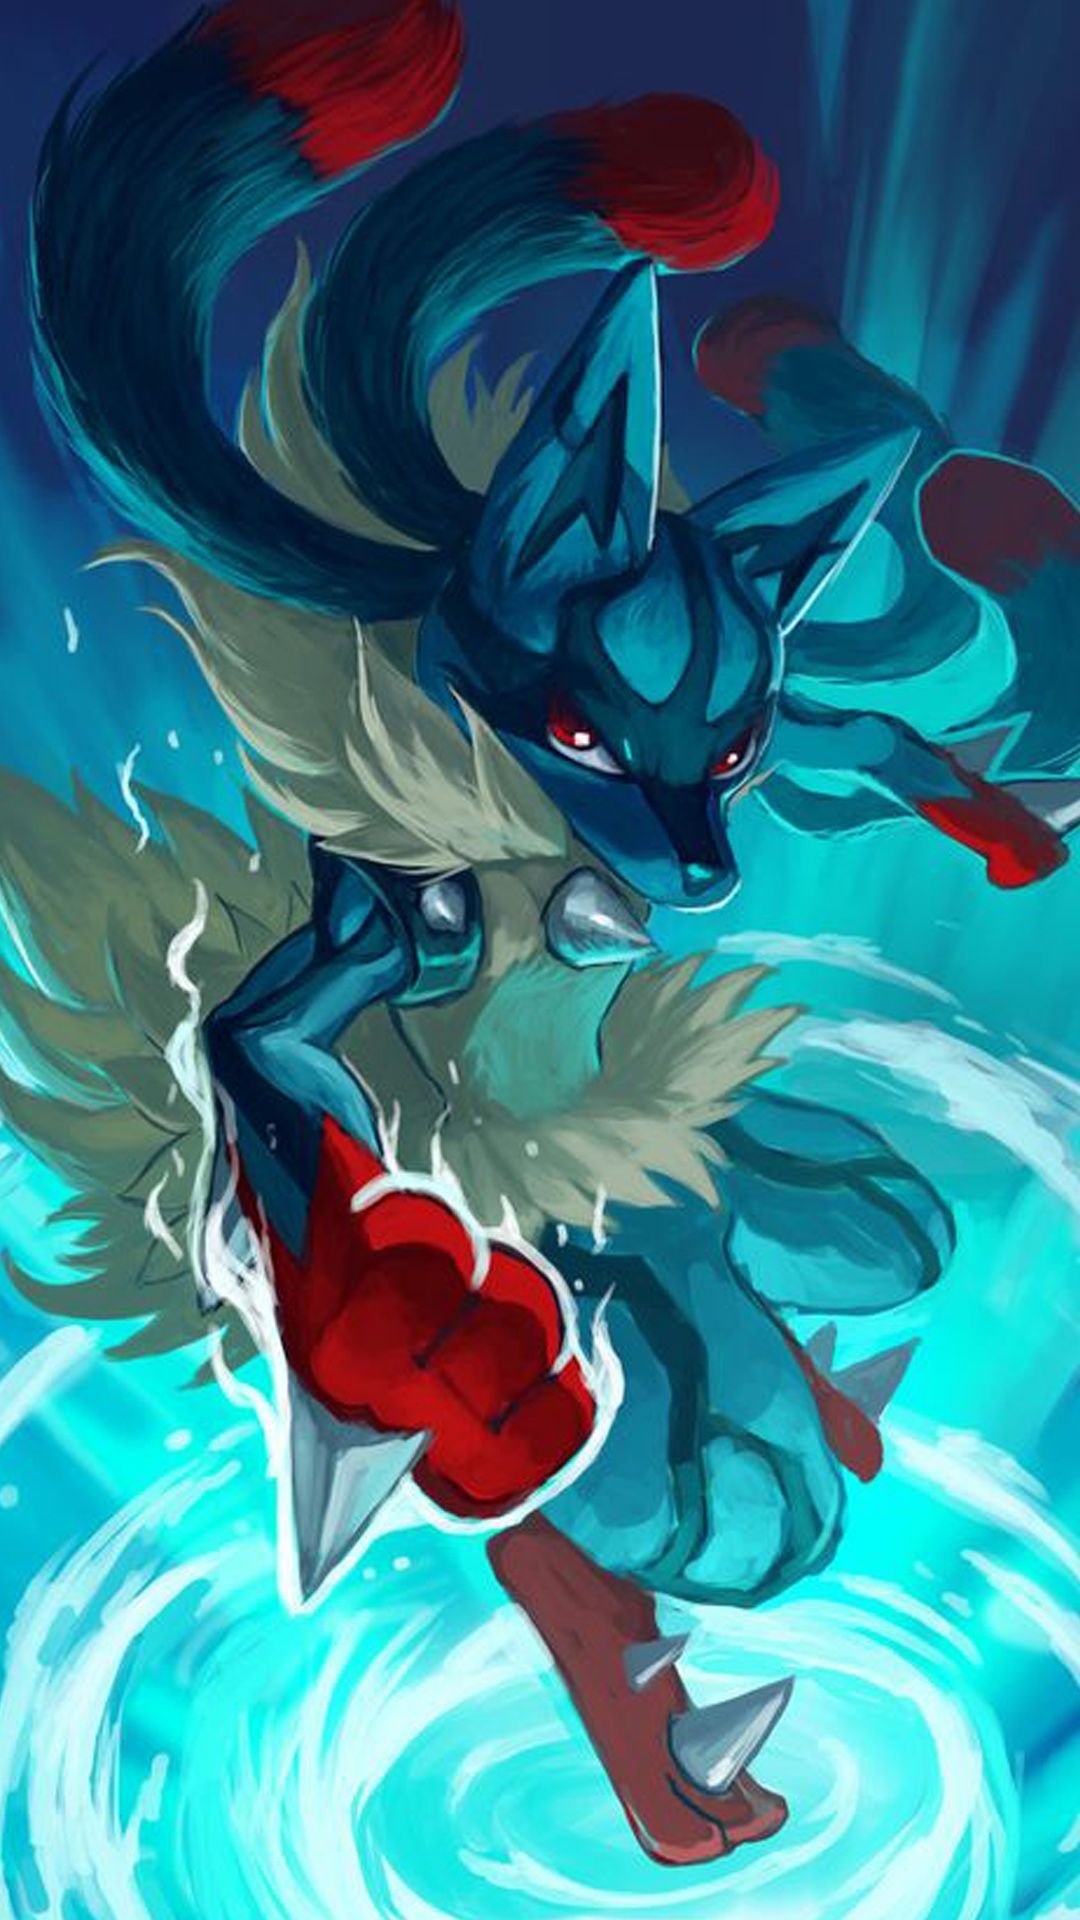 60 Lucario Pokémon HD Wallpapers and Backgrounds